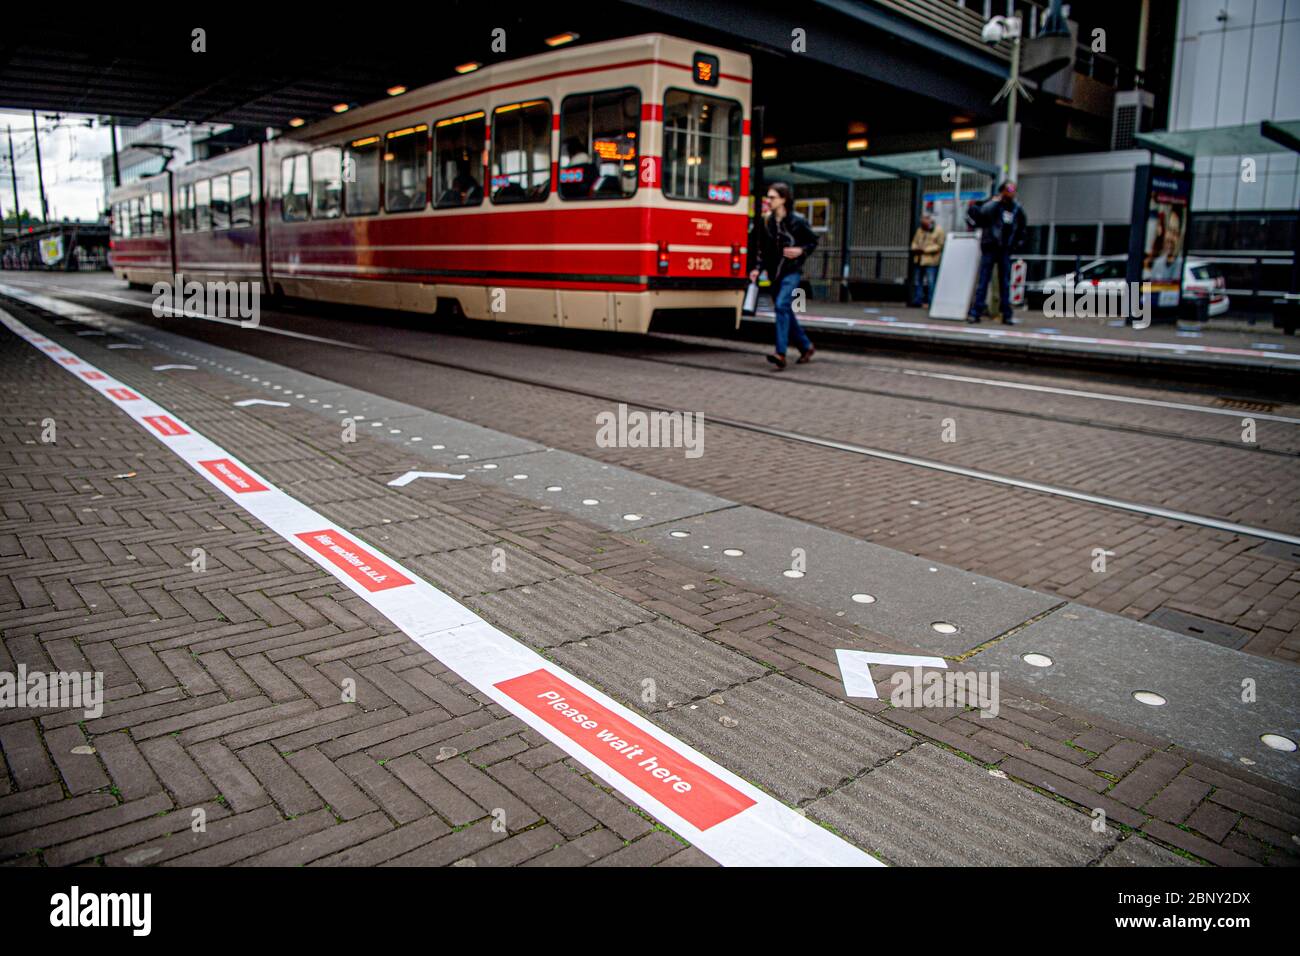 Public transport company HTM social distance measure stickers and signs stuck at all stops in the centre of The Hague. The company wants to ensure that passengers obey the measure as public transport is getting busier as the lockdown is becoming more relaxed. Stock Photo